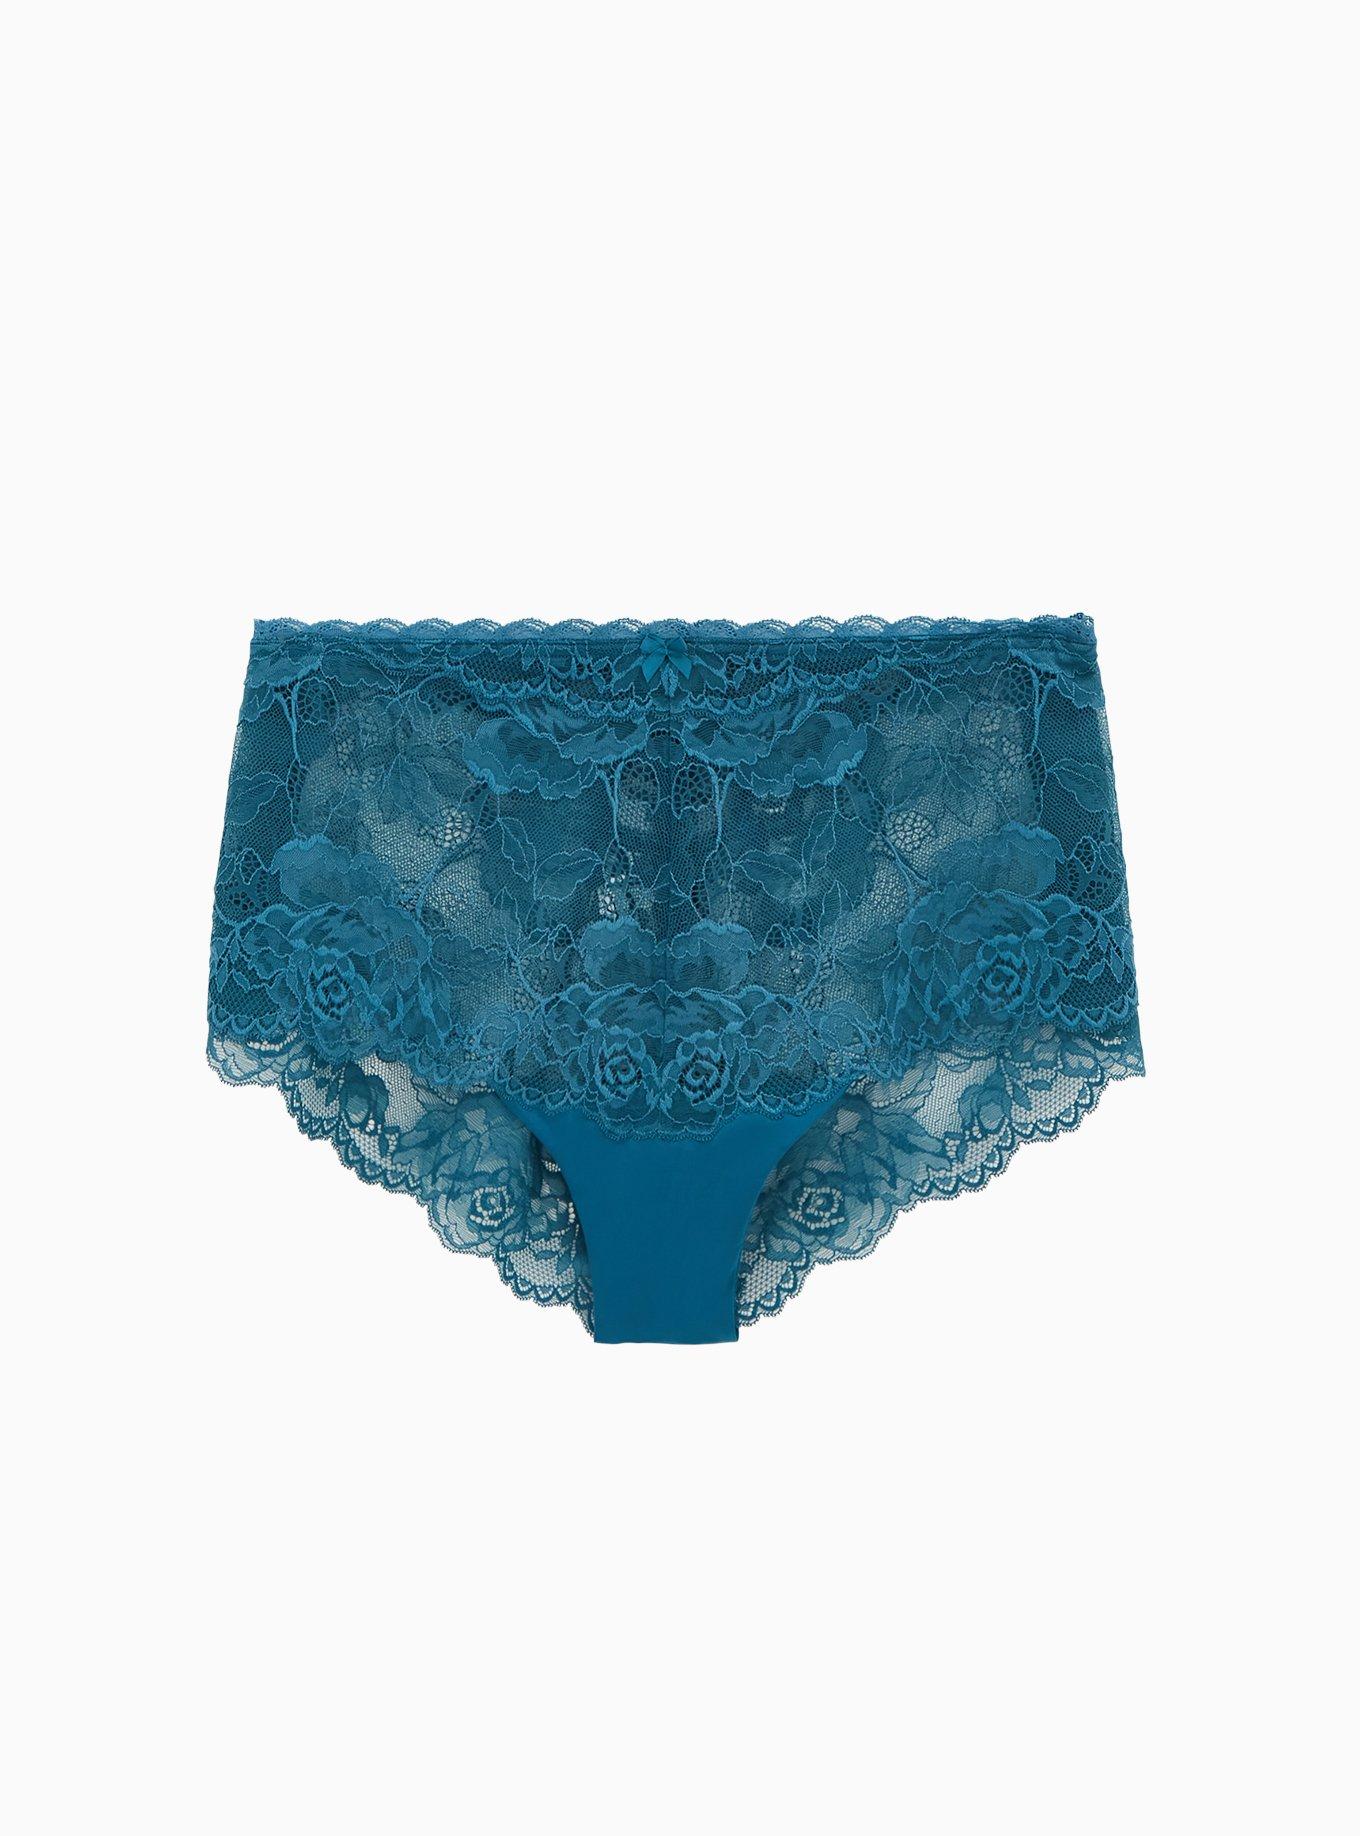 Lace Cheeky Panty - Twilight blue